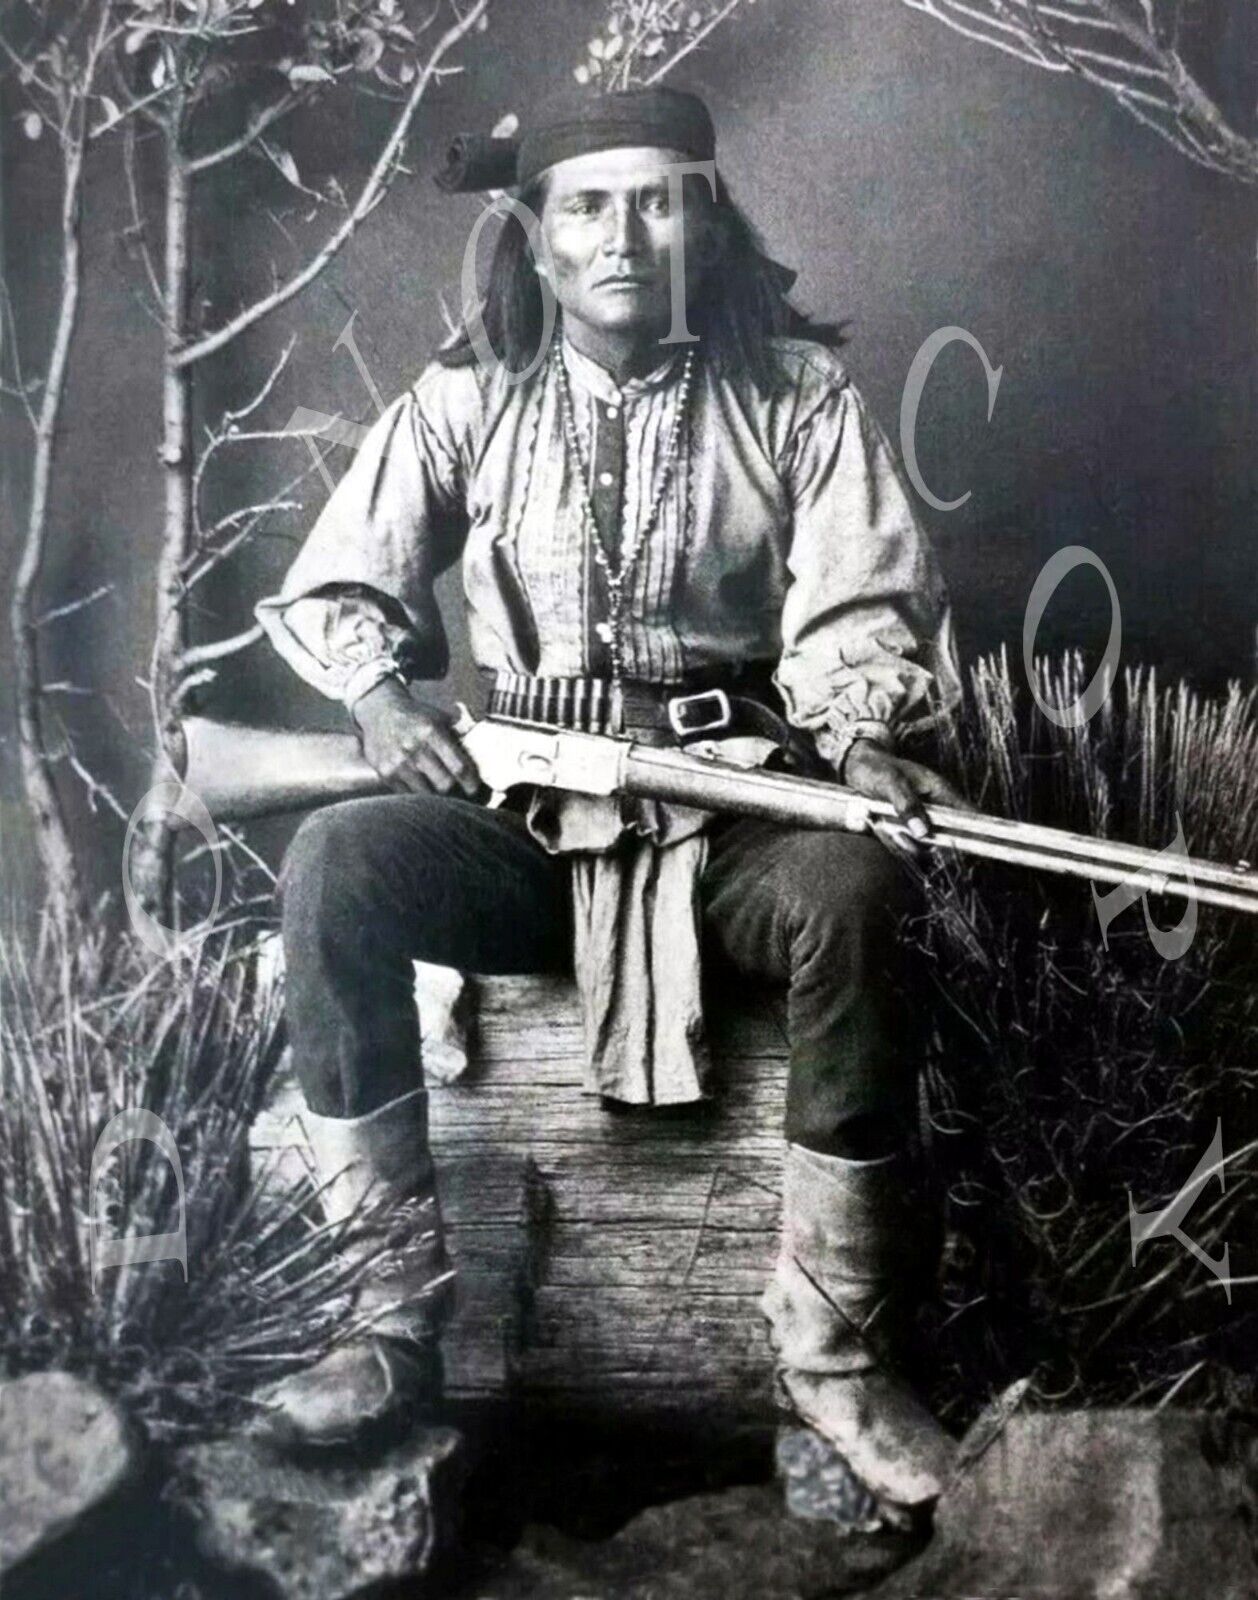 ANTIQUE 8X10 REPRO PHOTO PRINT APACHE AMERICAN INDIAN WITH WINCHESTER 1876 RIFLE